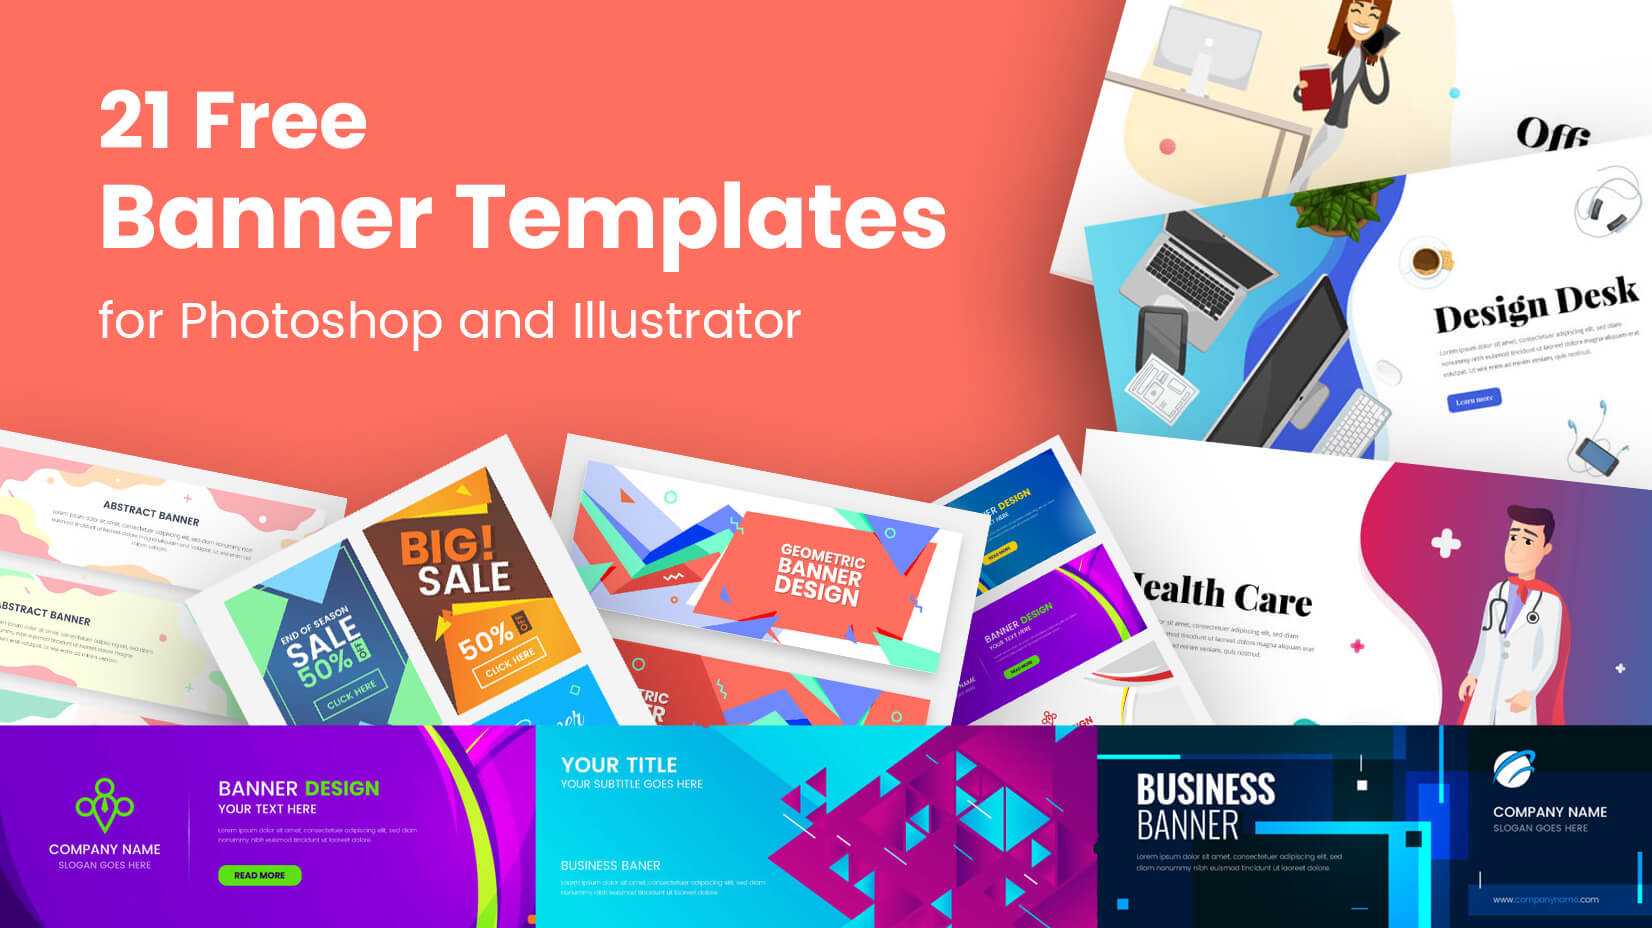 21 Free Banner Templates For Photoshop And Illustrator Intended For Banner Template For Photoshop